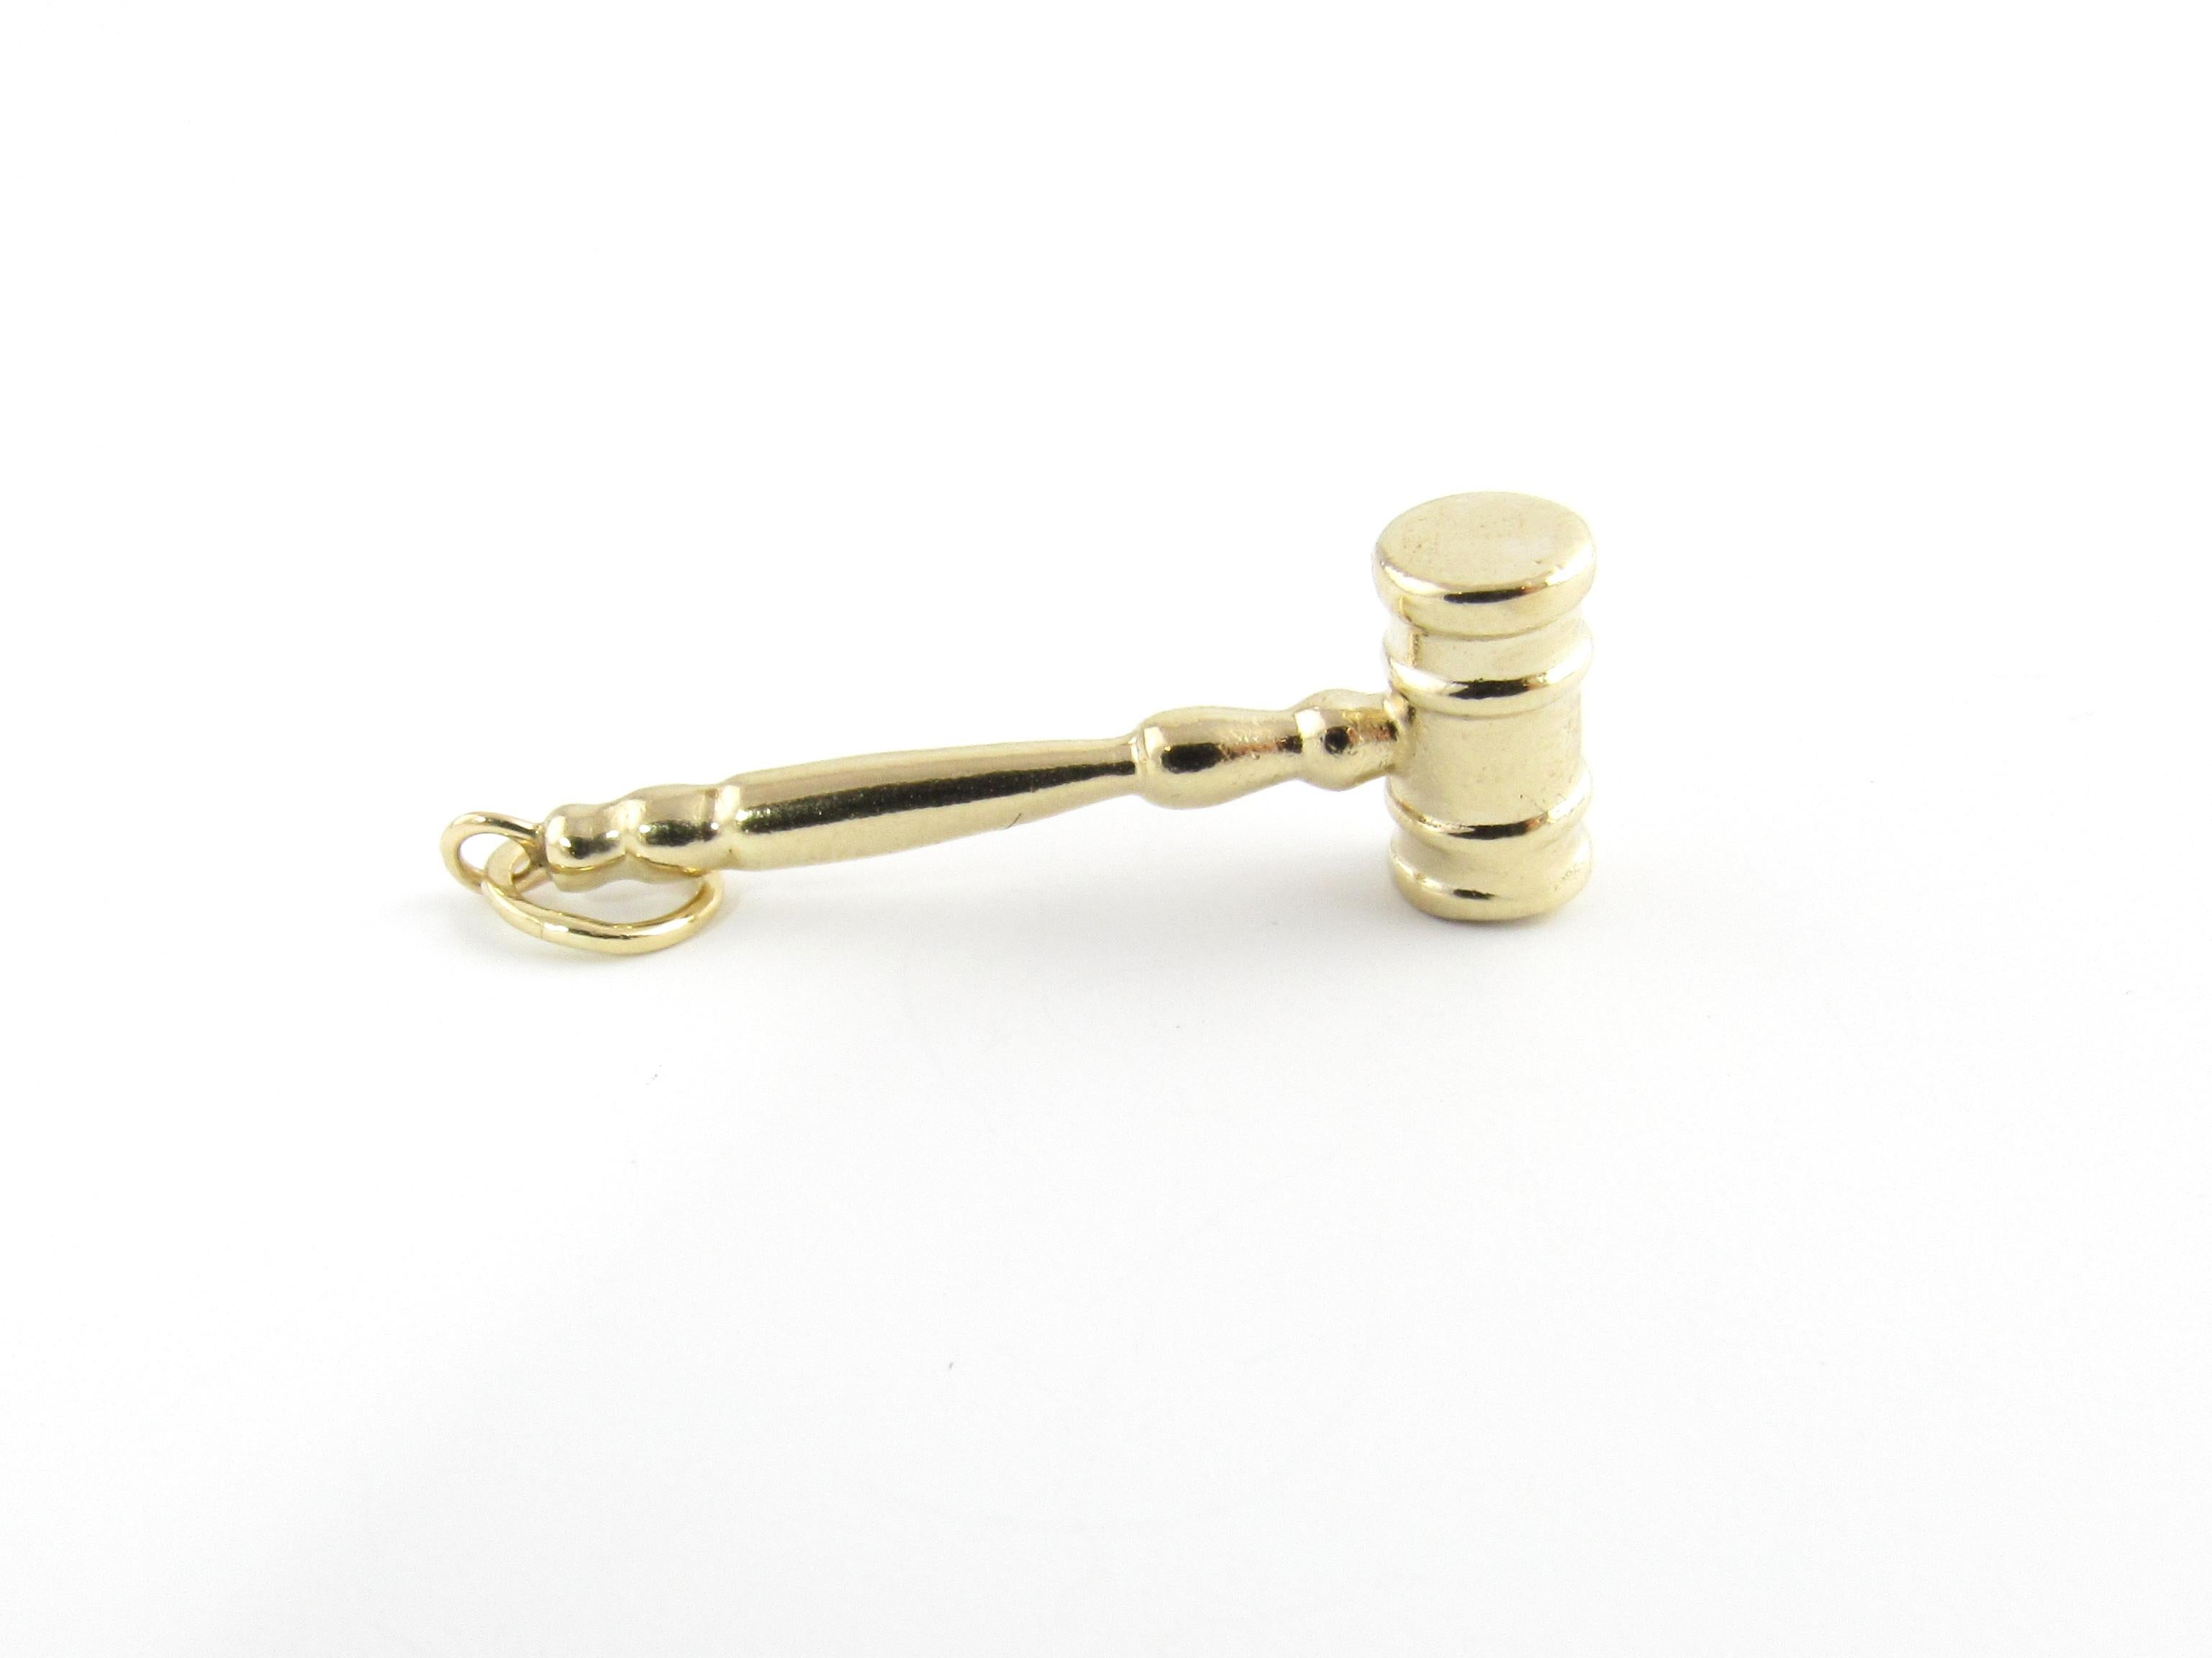 Vintage 14 Karat Yellow Gold Gavel Charm

Order in the court!

This lovely 3D charm features a miniature gavel meticulously detailed in 14K yellow gold.

Size: 31 mm x 11 mm

Weight: 1.9 dwt. / 3.0 gr.

Stamped: 14K

Very good condition,